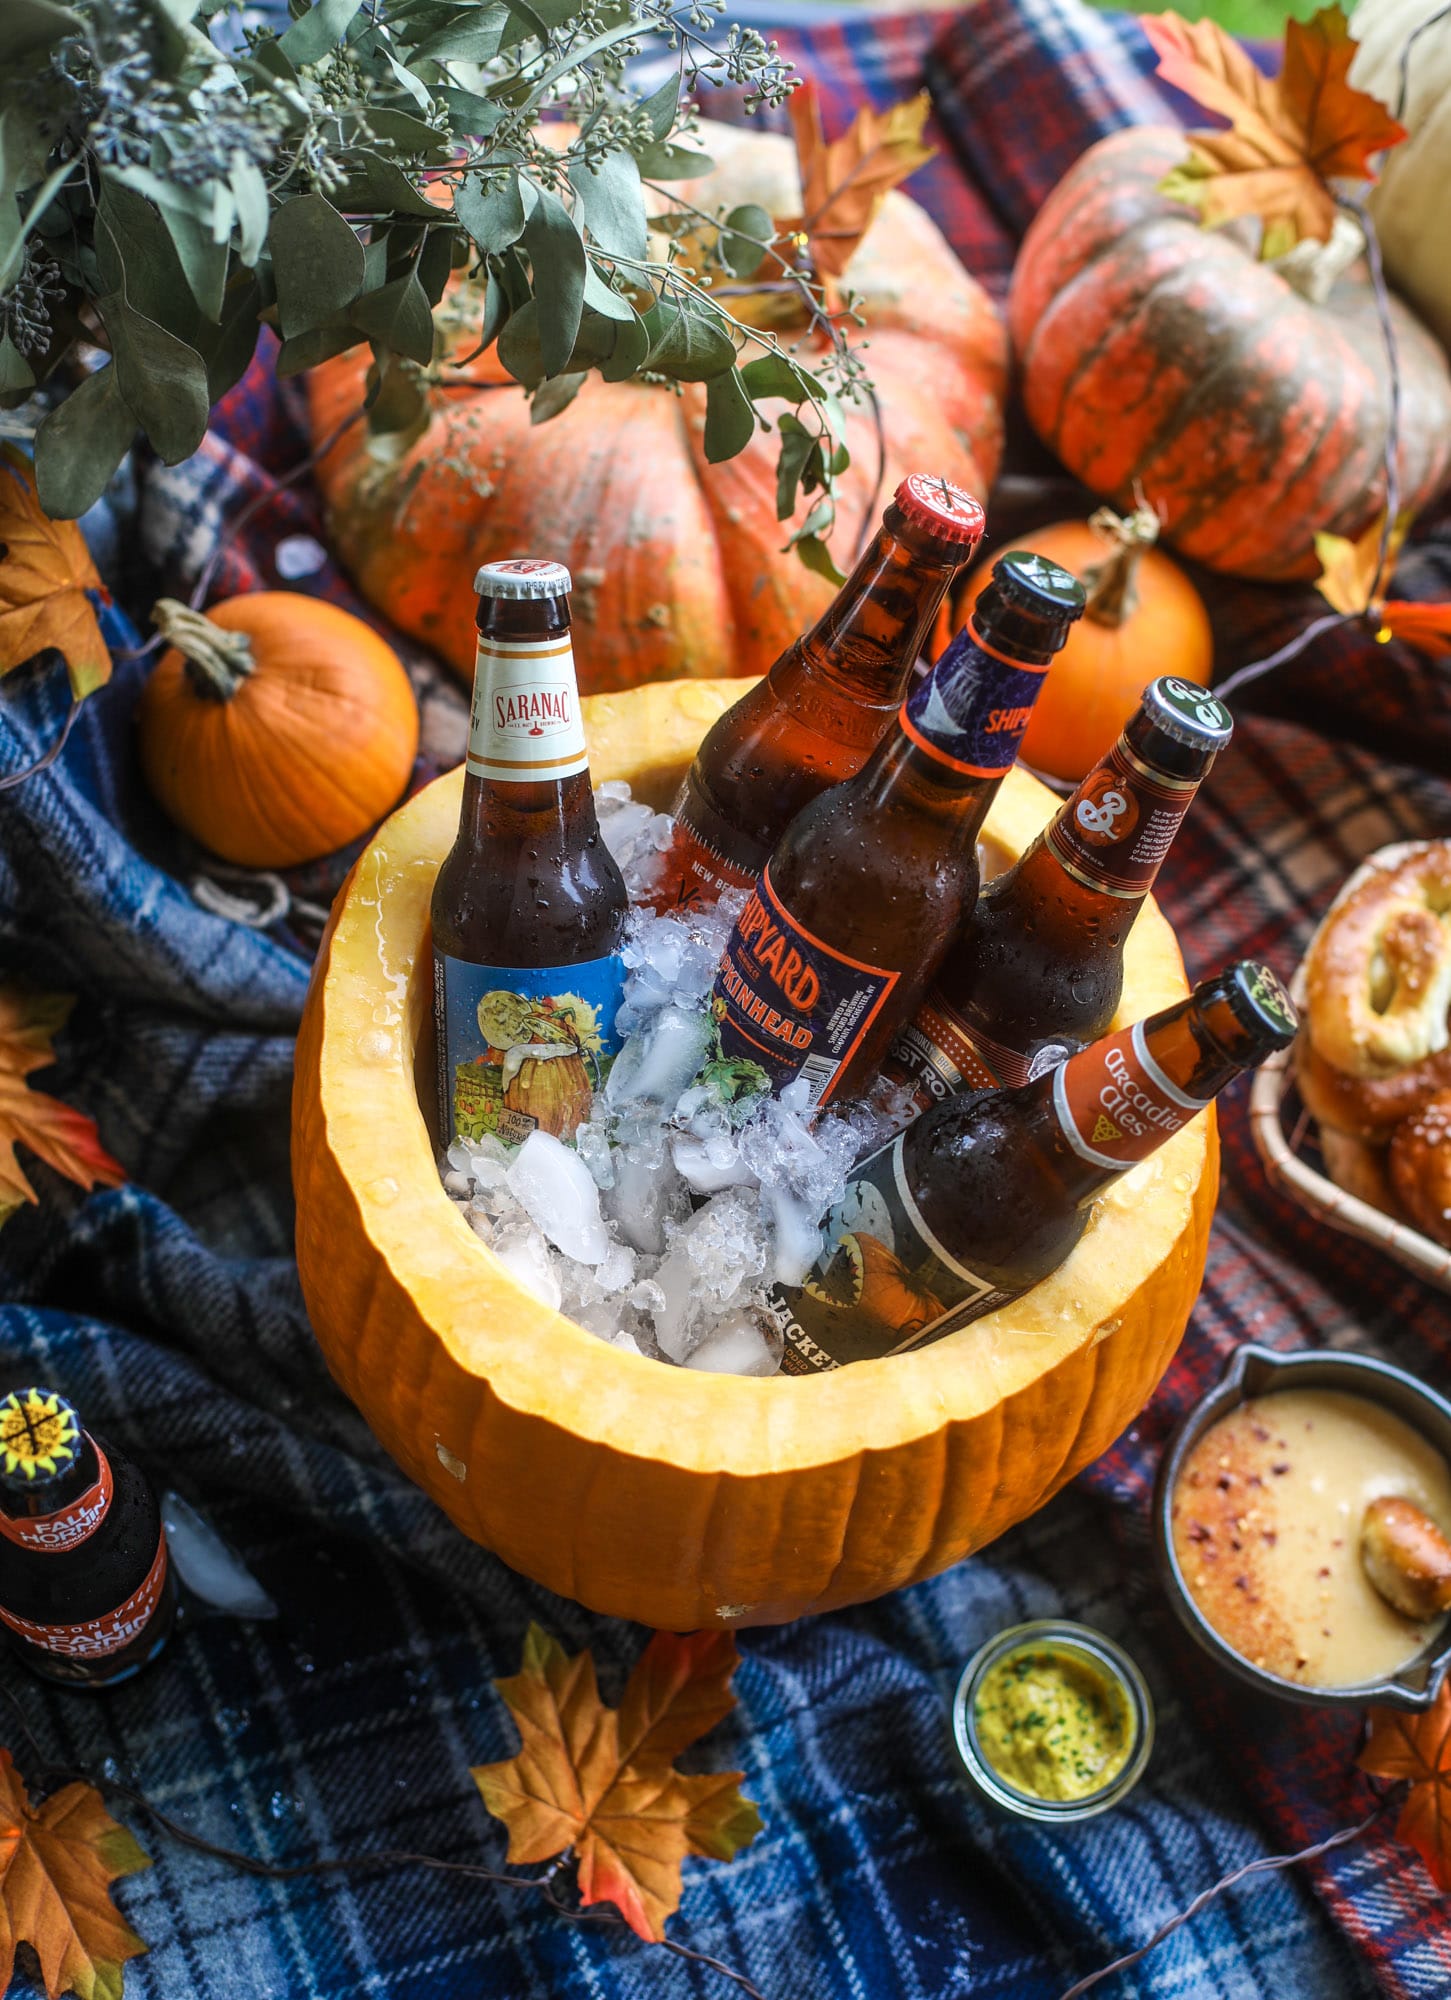 This is the cutest way ever to serve the best pumpkin beer! If you do a pumpkin beer party of a pumpkin beer tasting, this pumpkin cooler is an adorable (and easy!) way to make things festive. Kick it up with a hot pretzel bar and lots of dipping sauce too! I howsweeteats.com #pumpkin #beer #cooler #softpretzel #fall #cheese